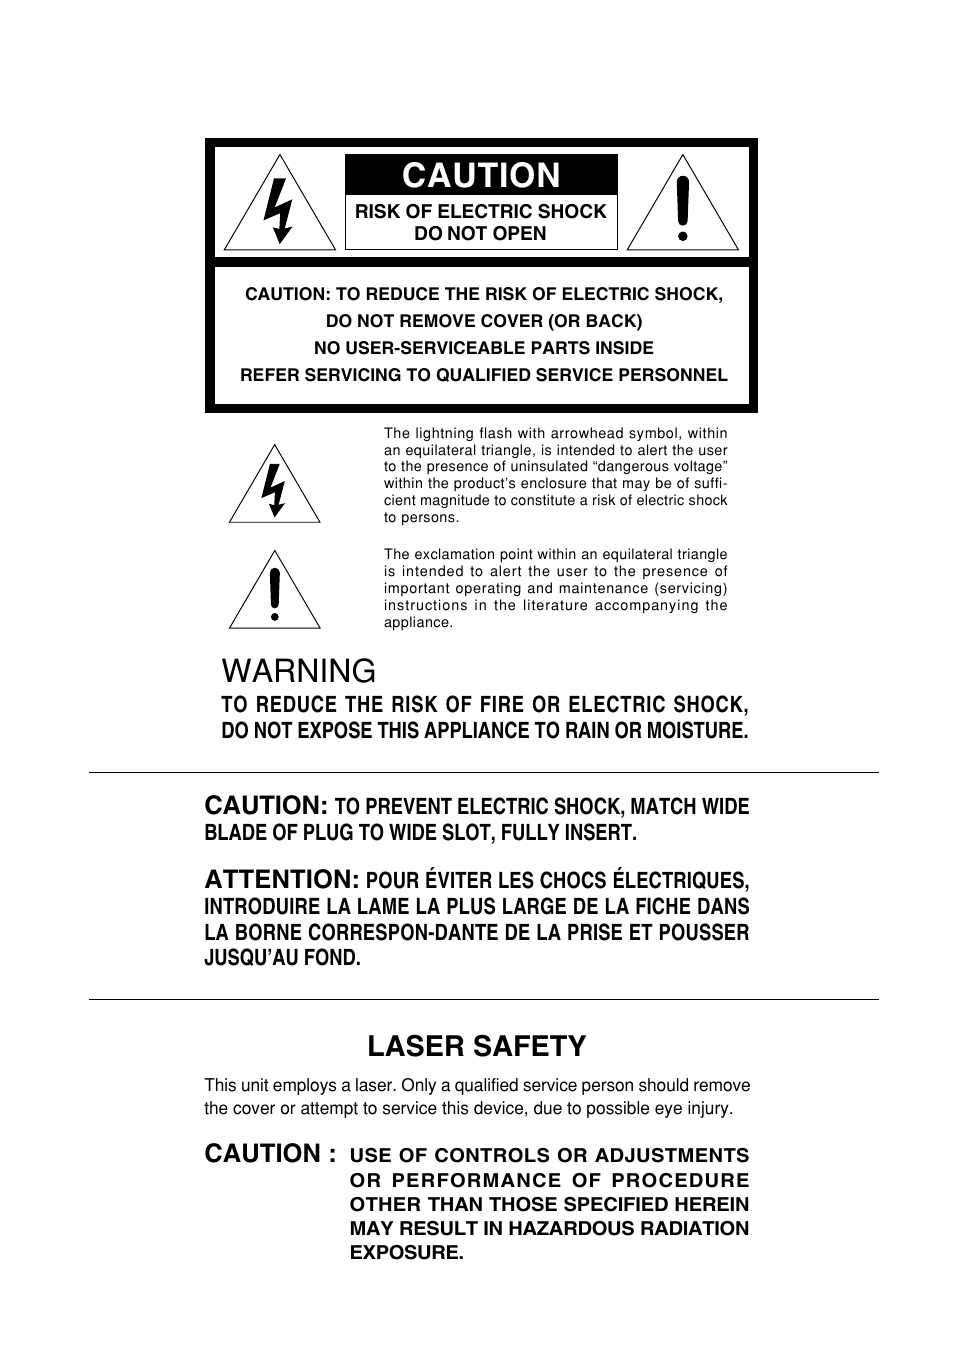 Warning, Laser safety, Caution | Attention | Marantz SA-11S1 User Manual | Page 2 / 29